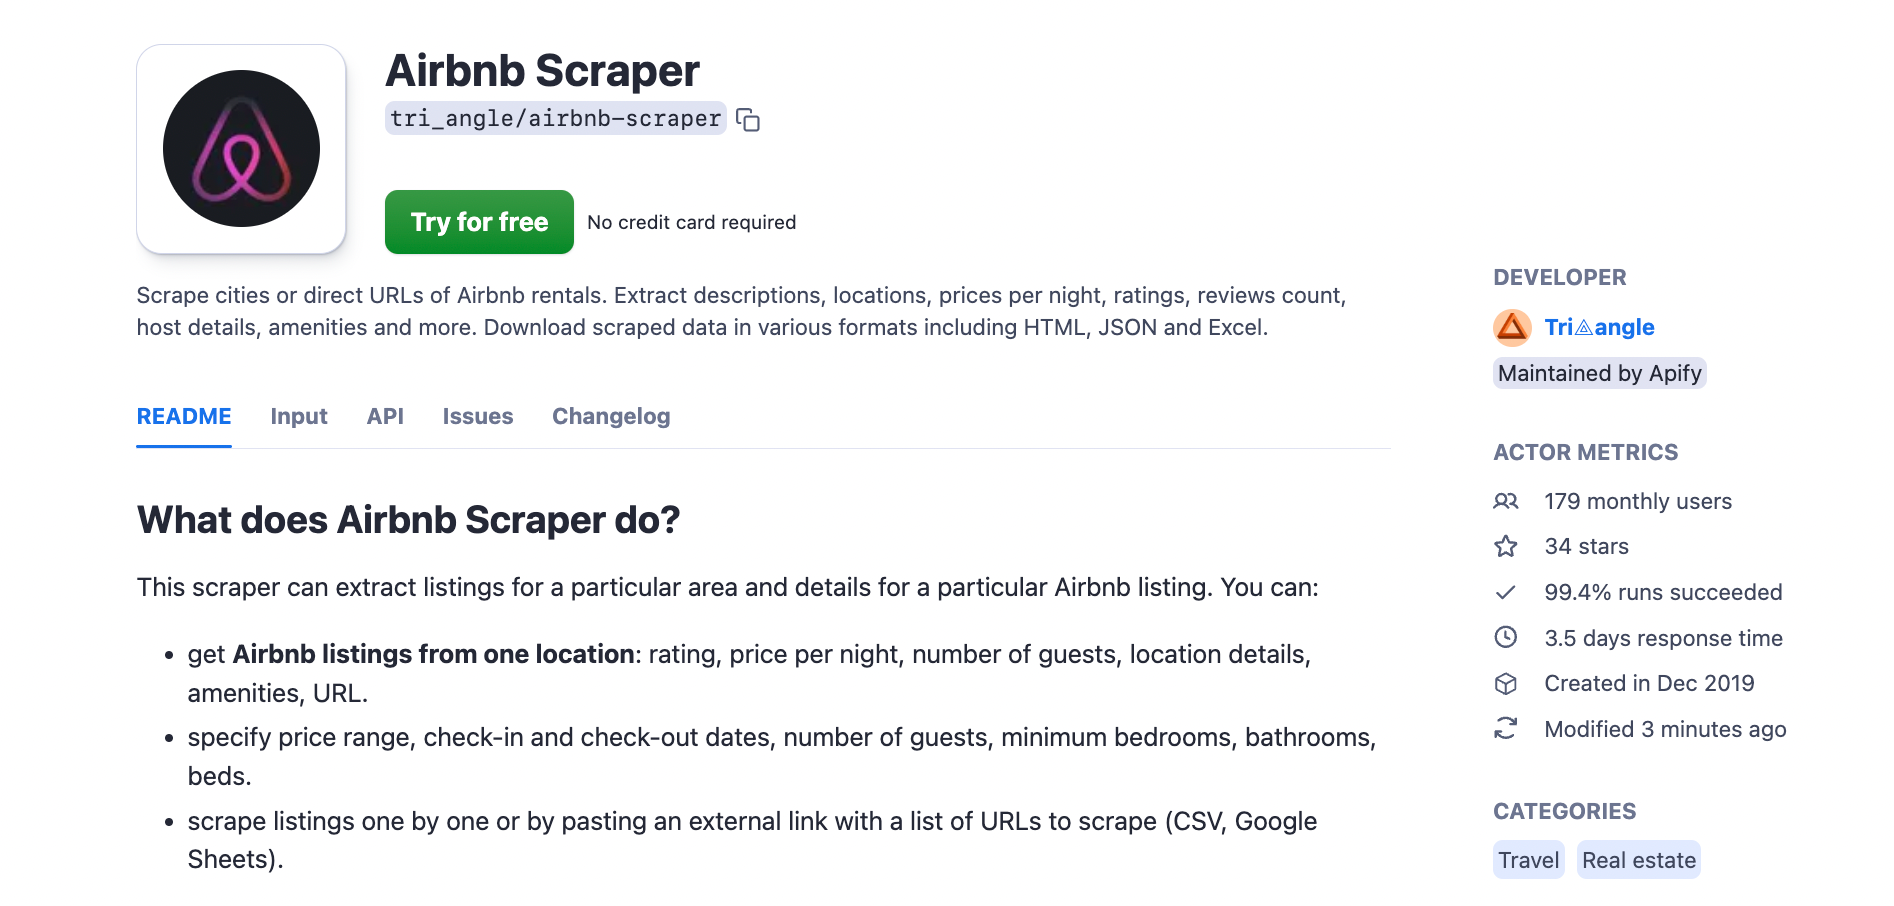 Find Airbnb Scraper page on Apify Store